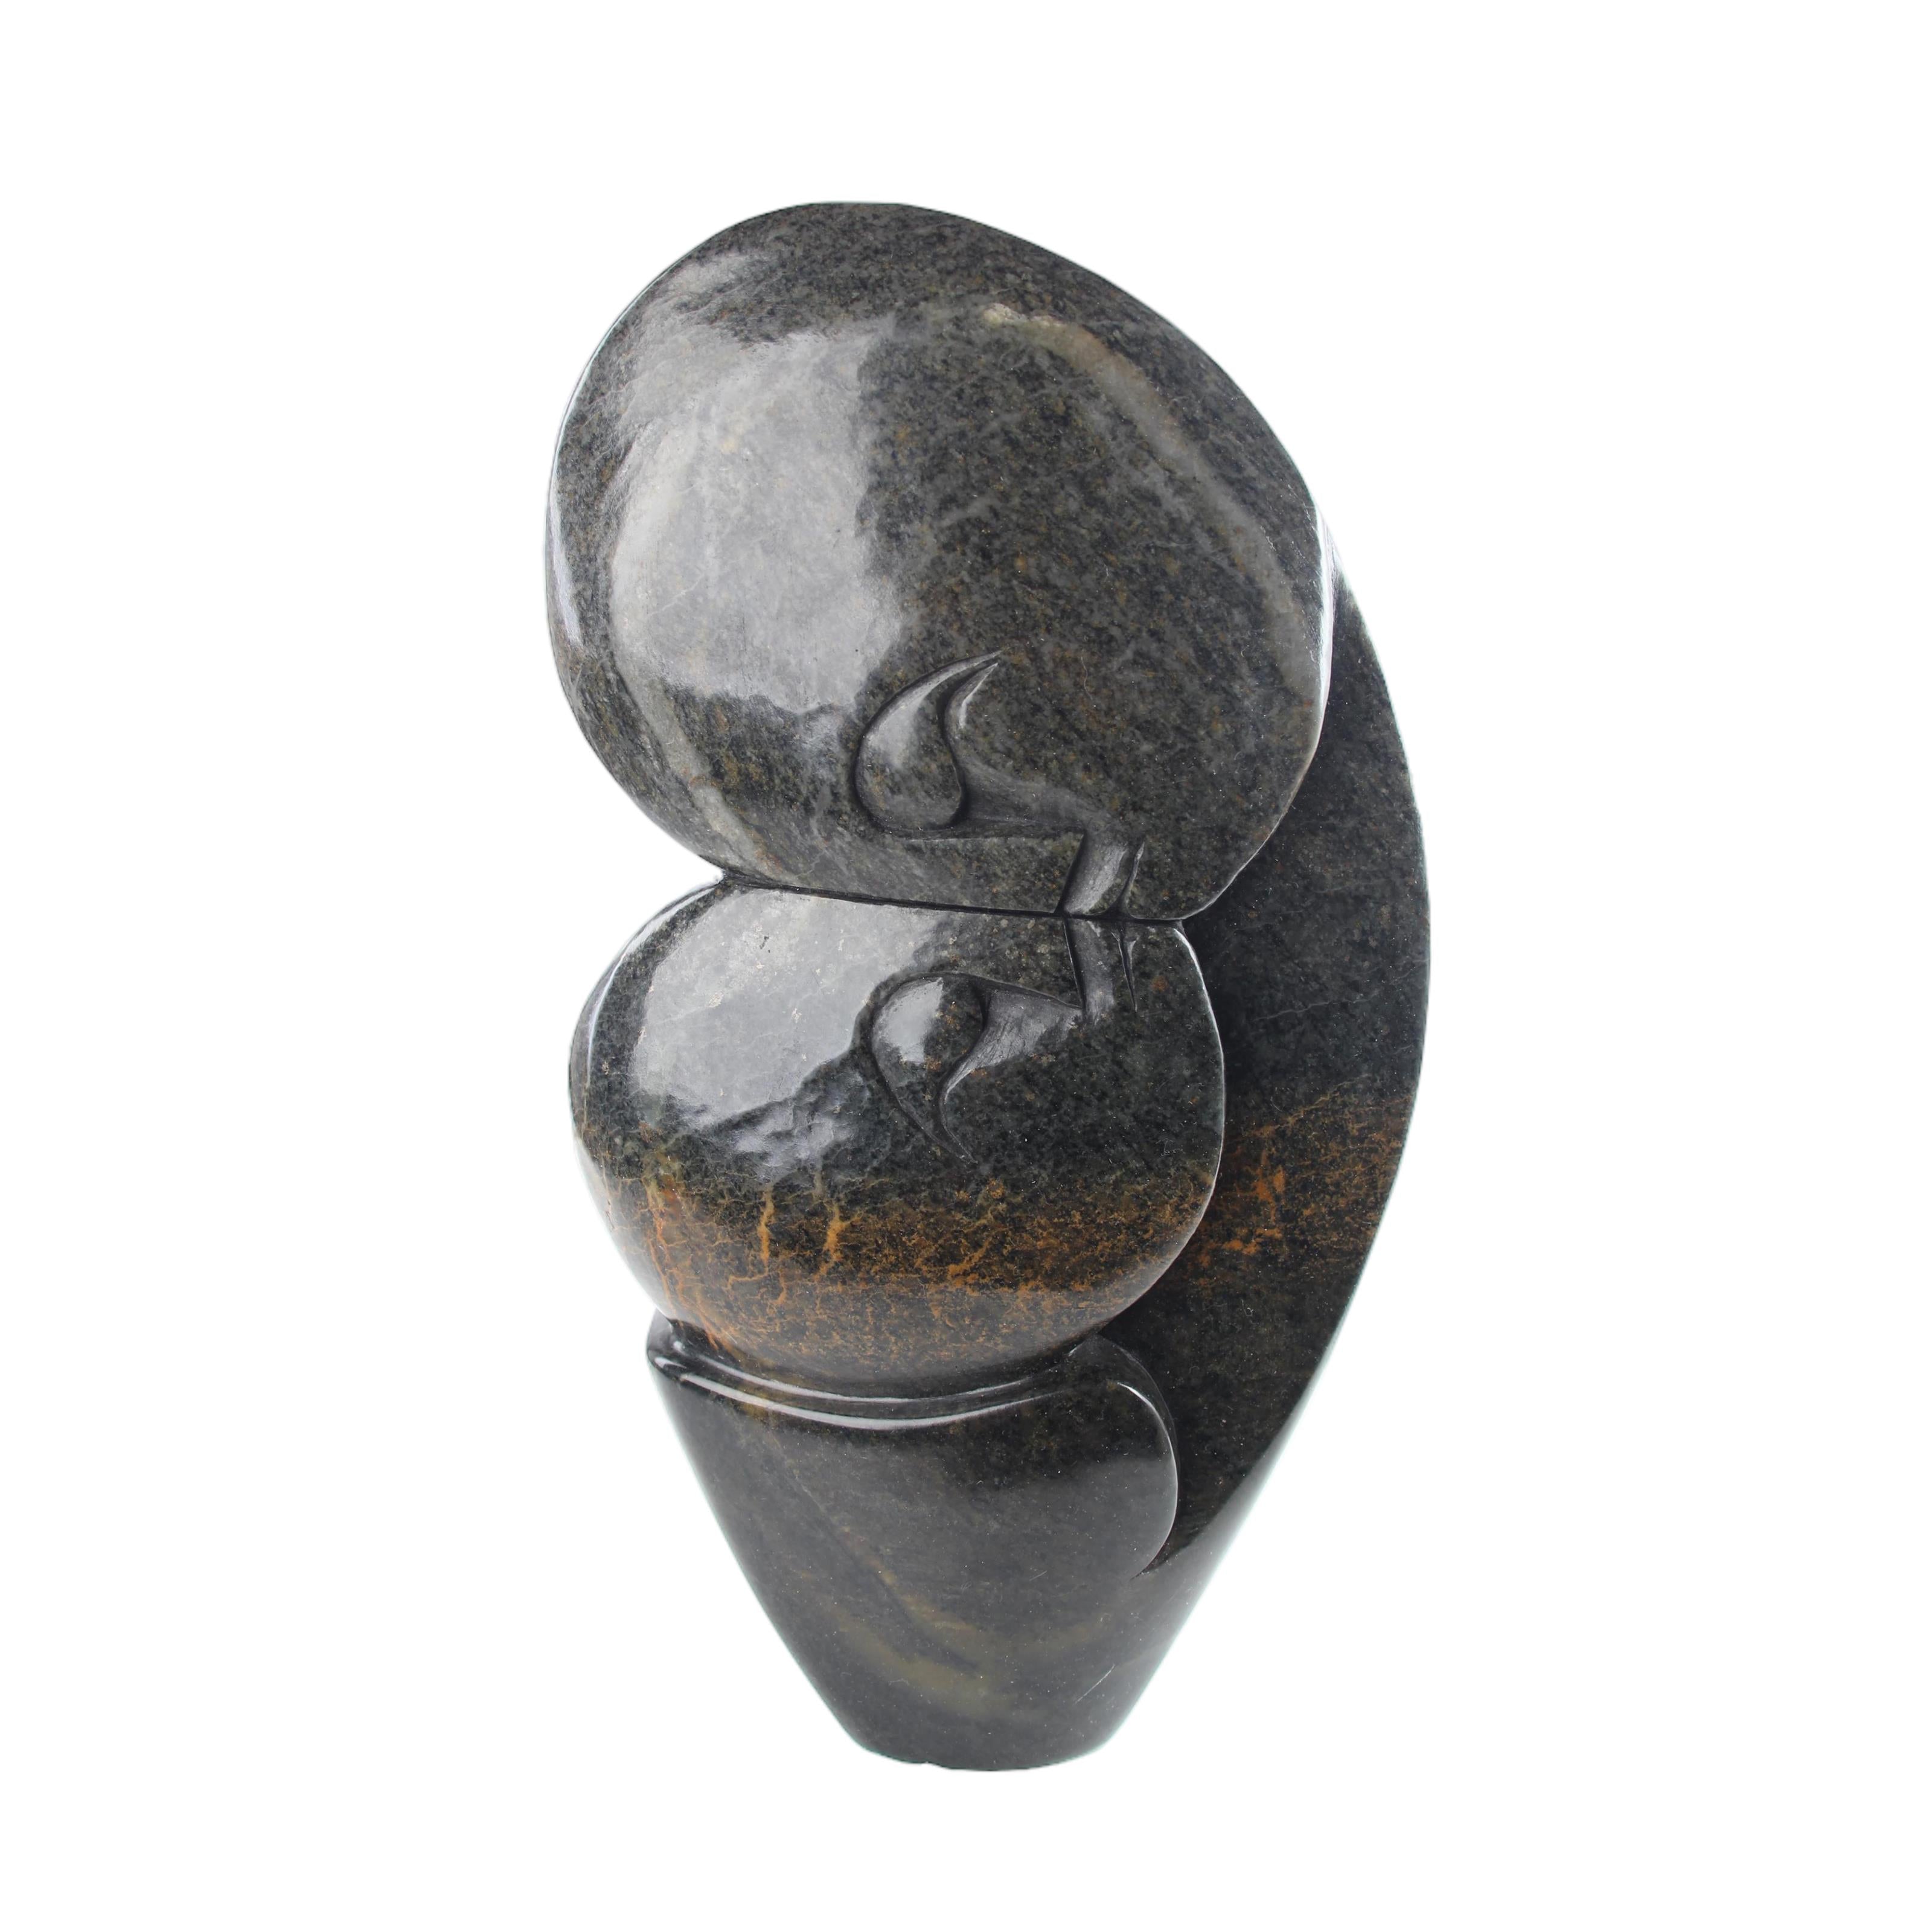 Shona Tribe Serpentine Stone Lovers ~14.2" Tall - Lovers